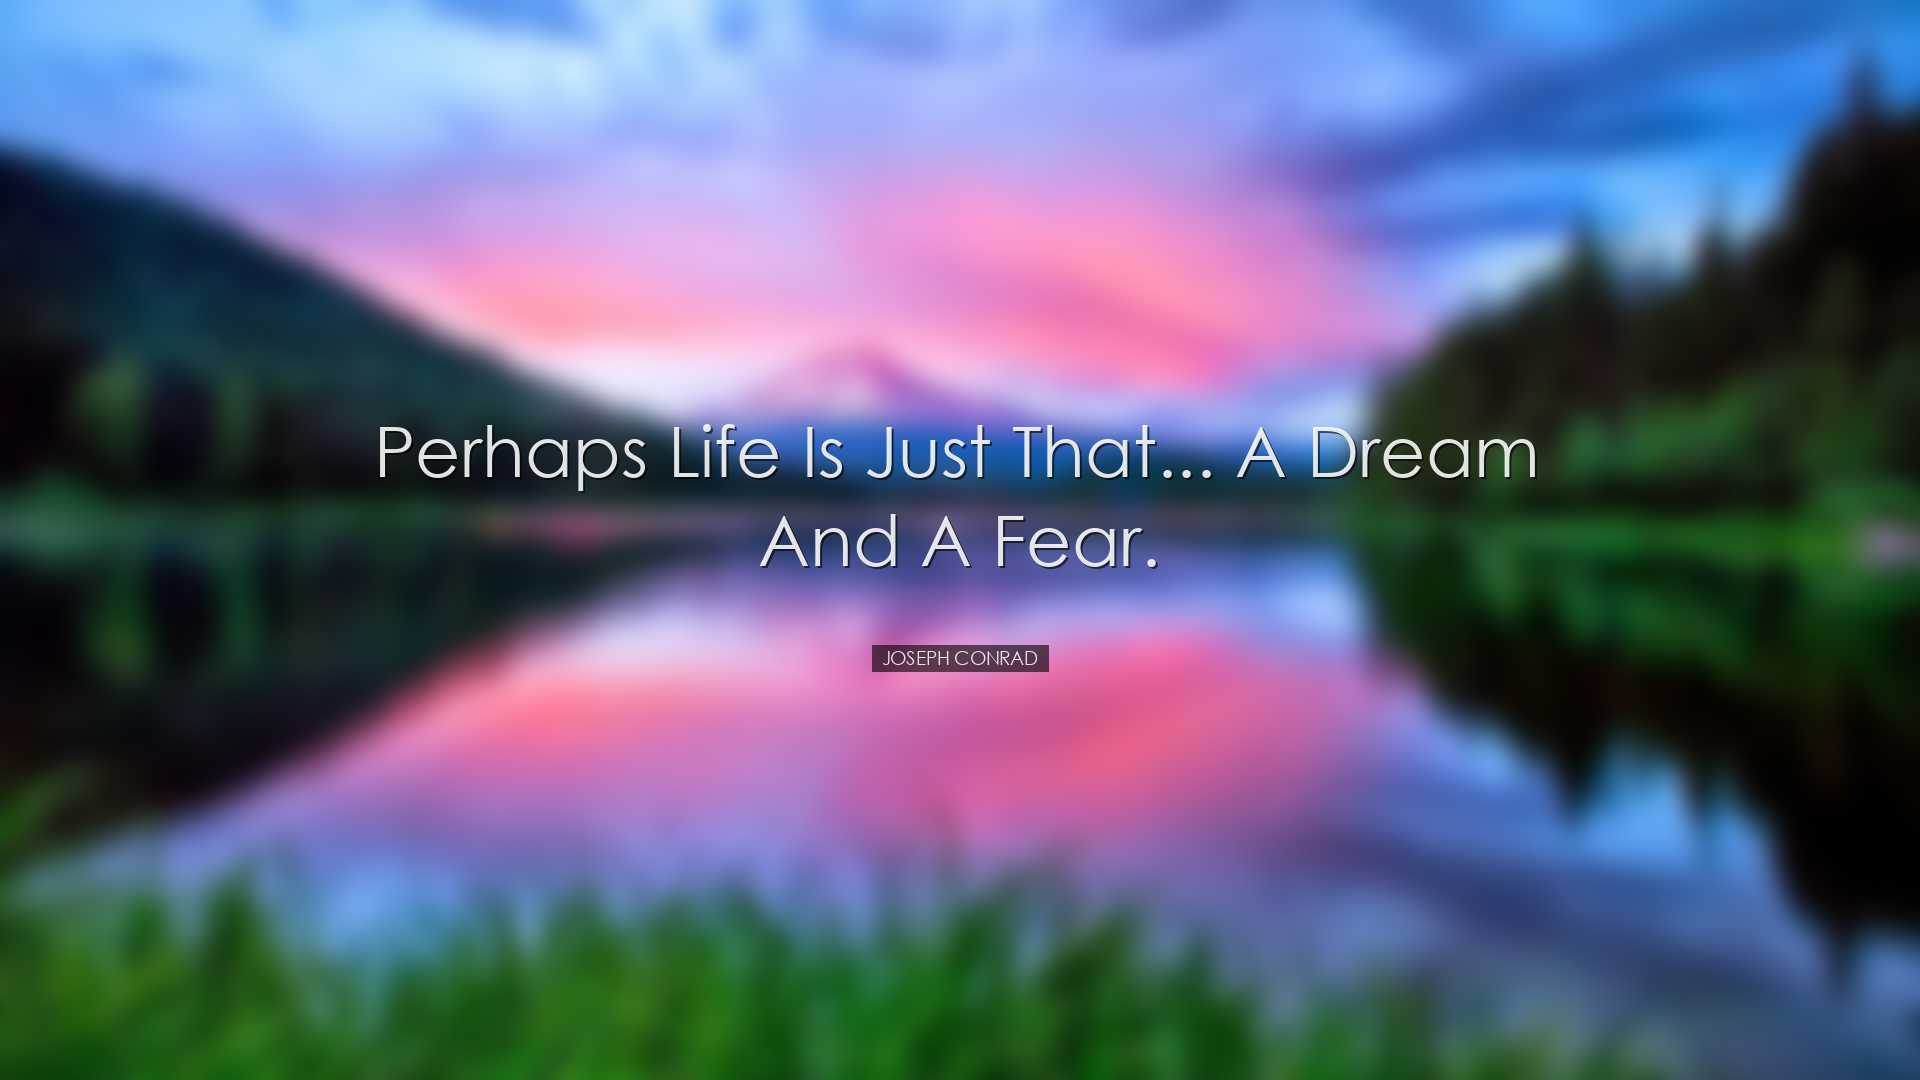 Perhaps life is just that... a dream and a fear. - Joseph Conrad